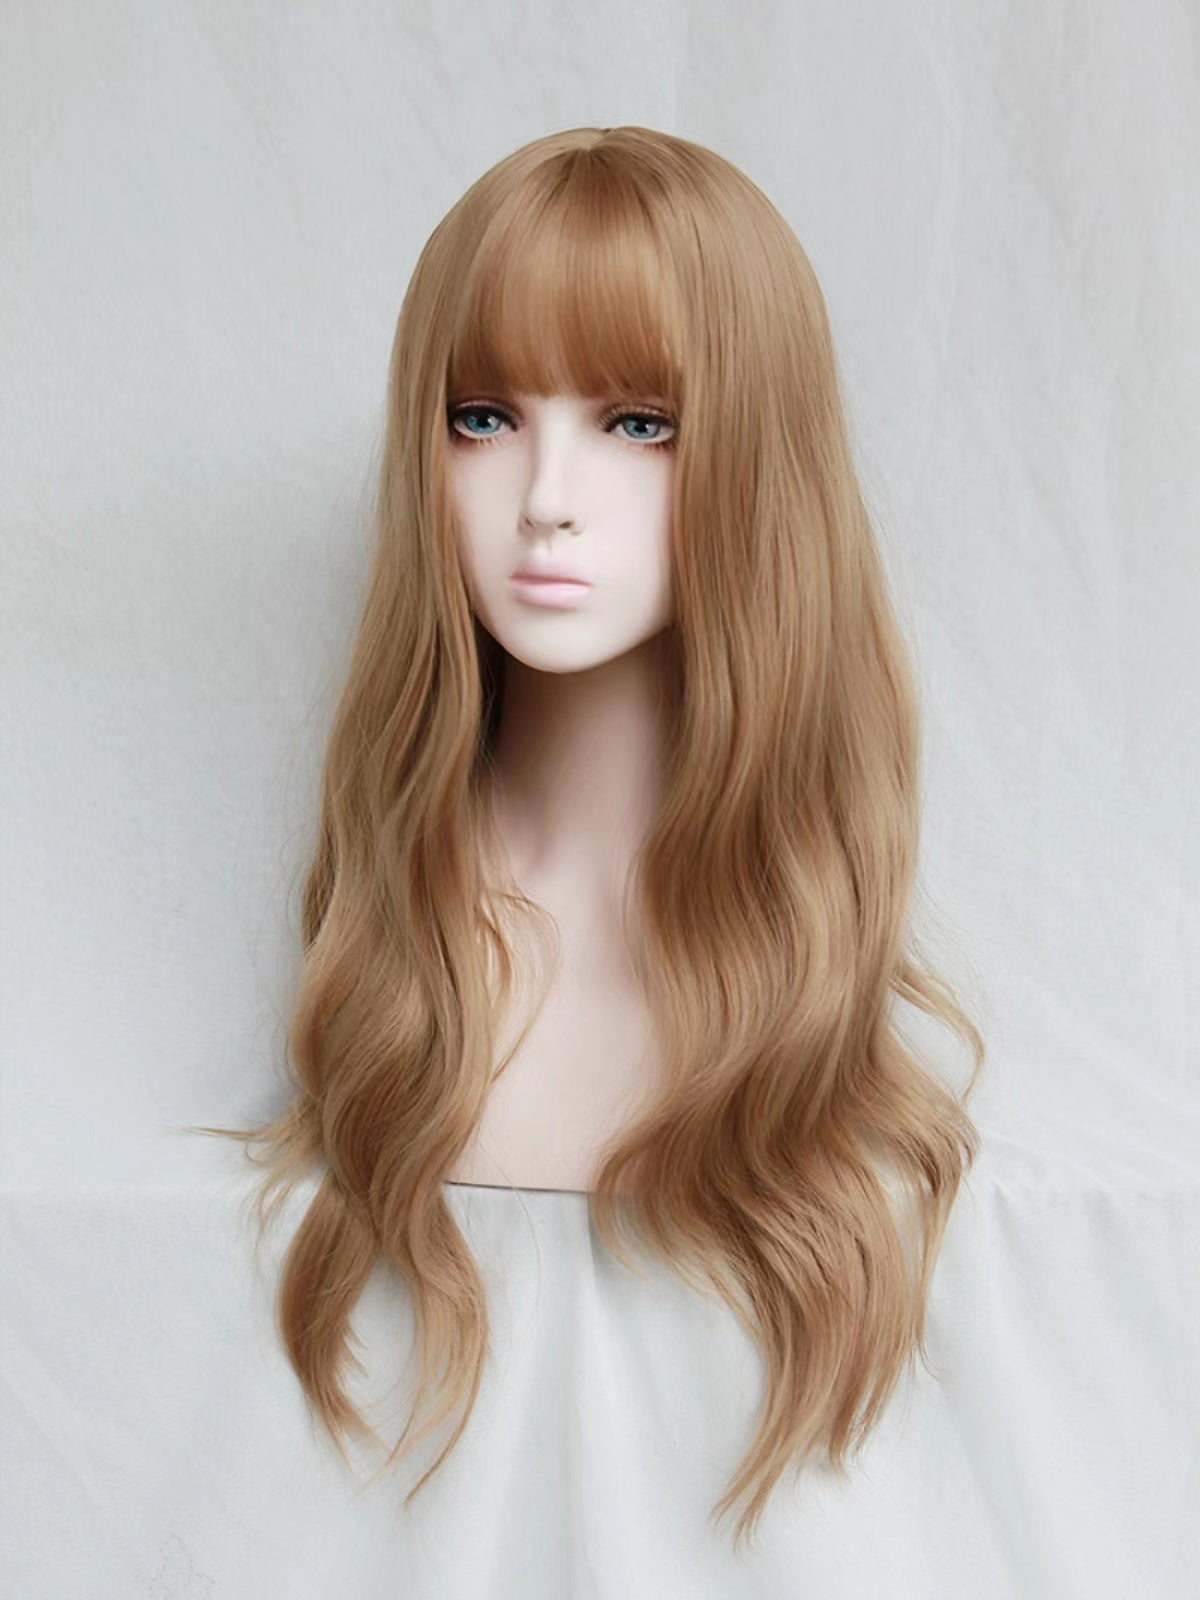 2022 New Style “Lisa” Inspired Blonde Long Wavy Synthetic Wig with Bangs